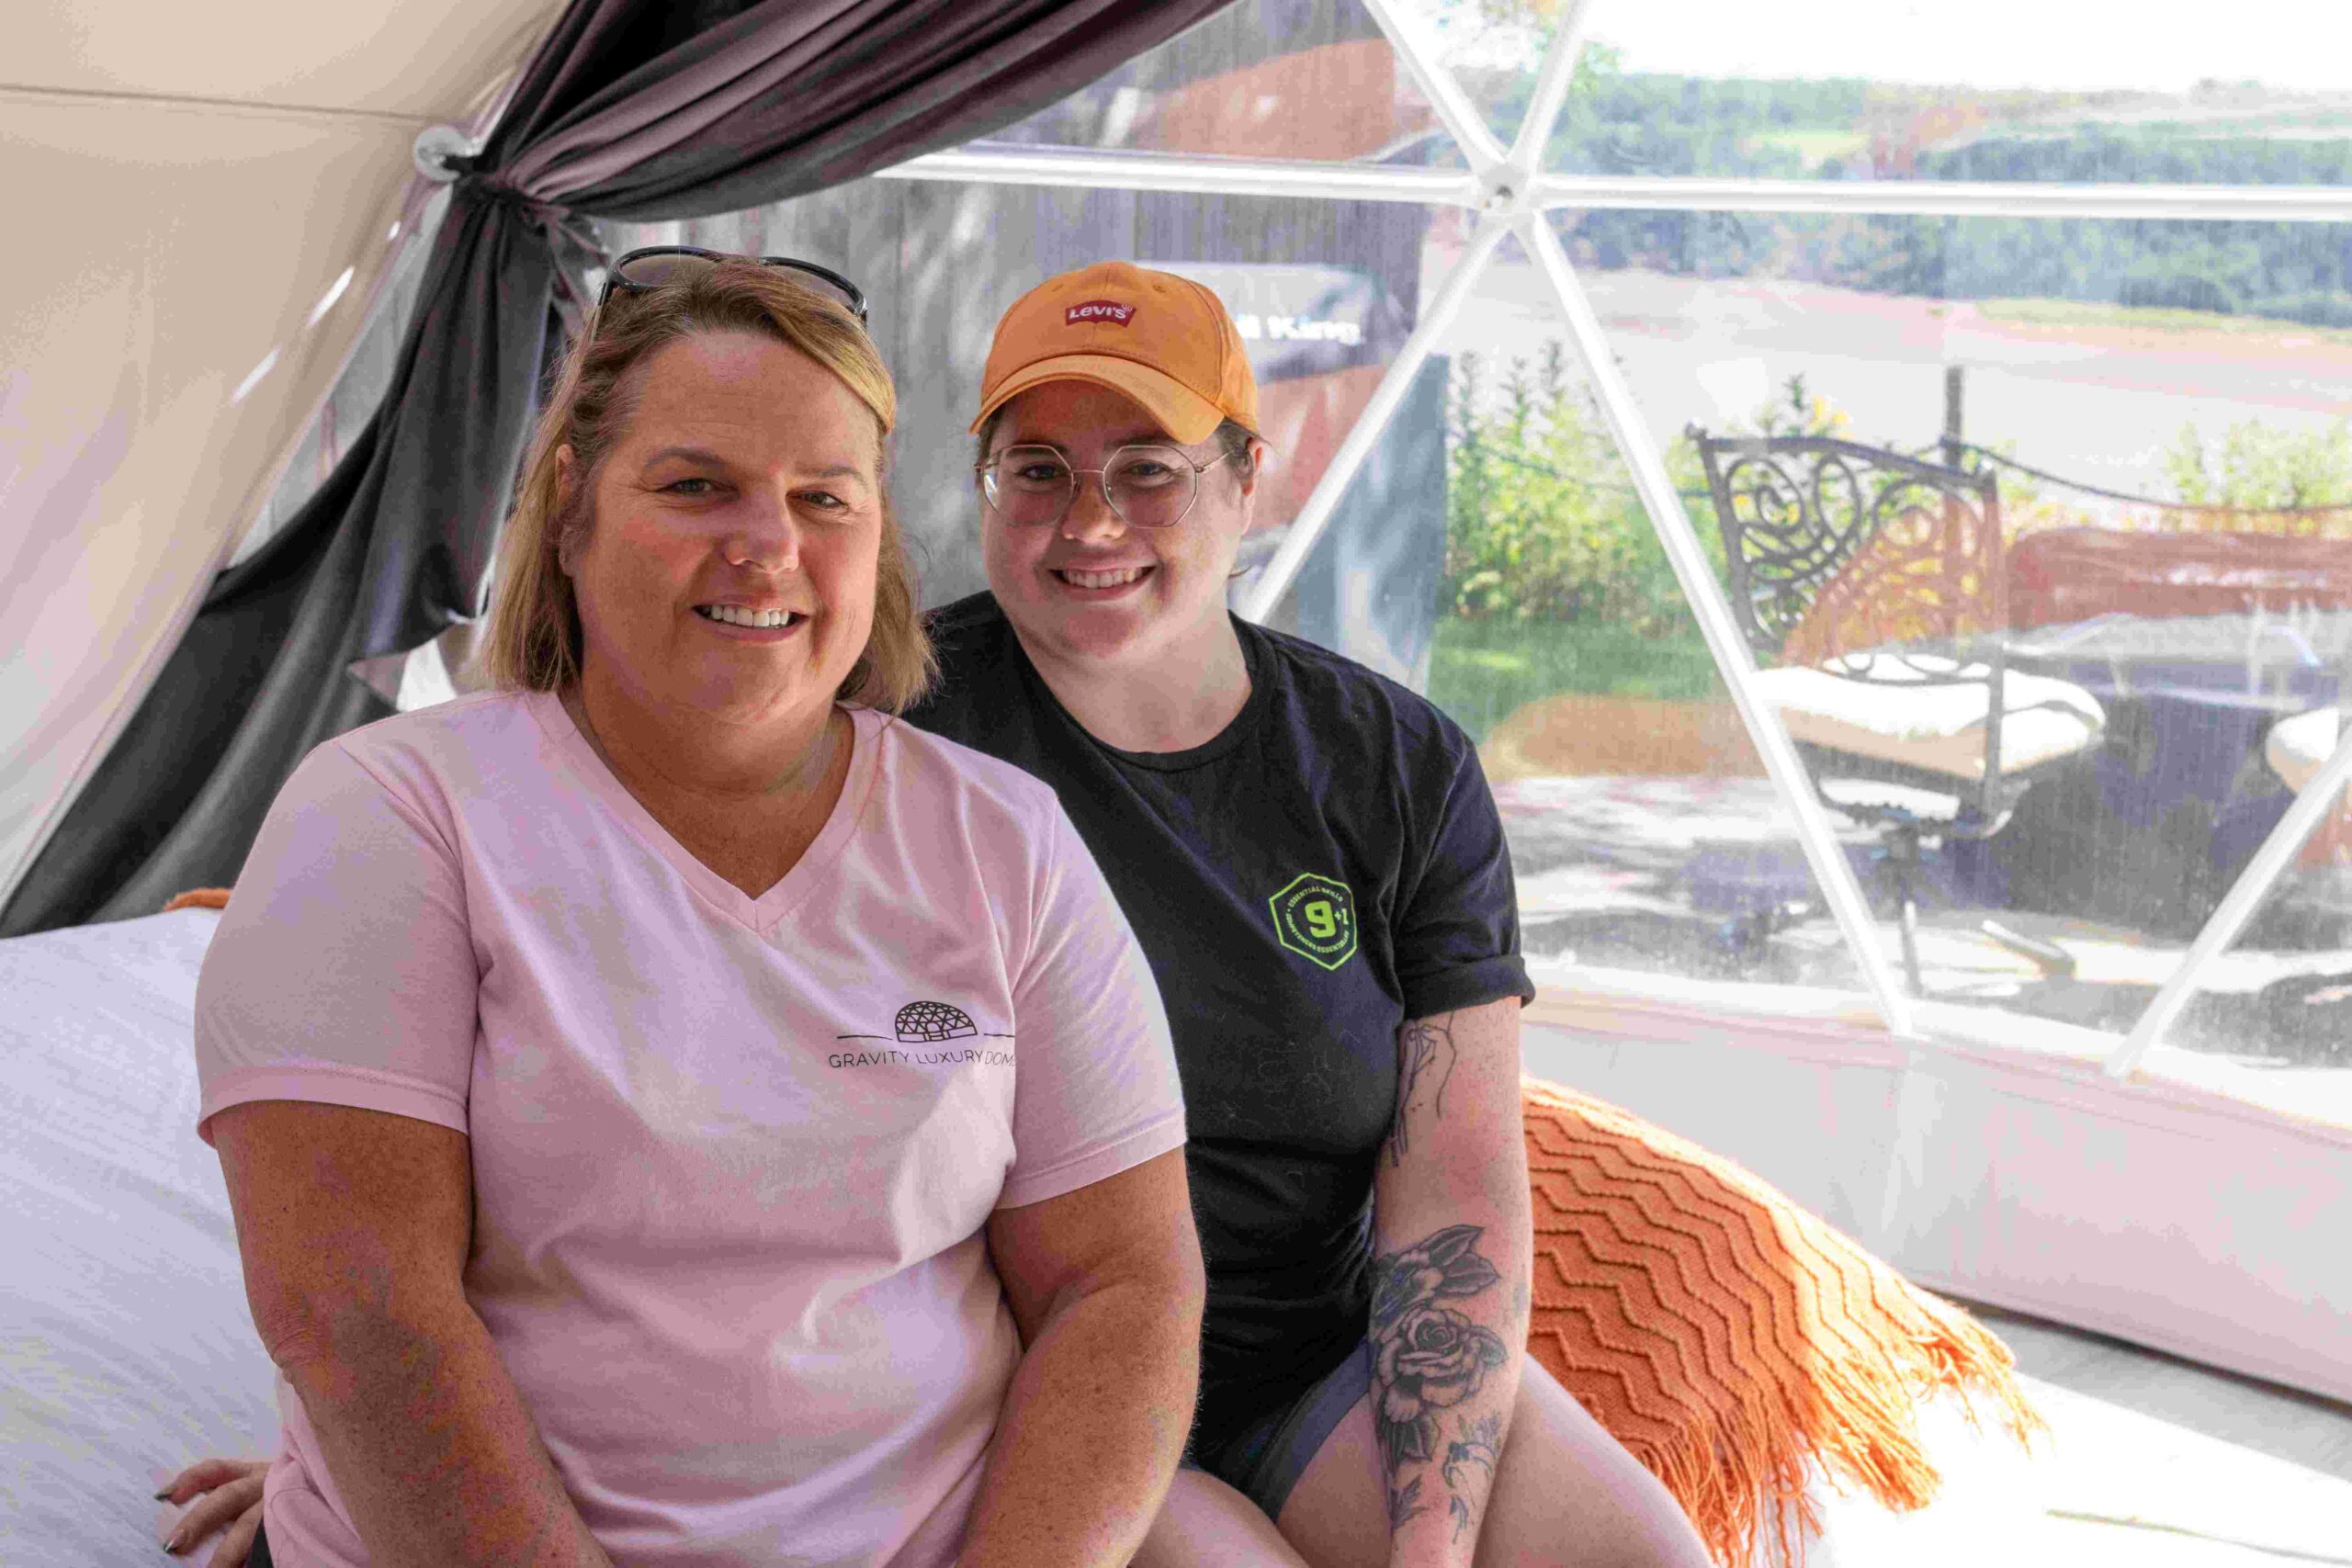 Mother and daughter owner-operators of Gravity Luxury Domes sit inside one of their glamping domes.